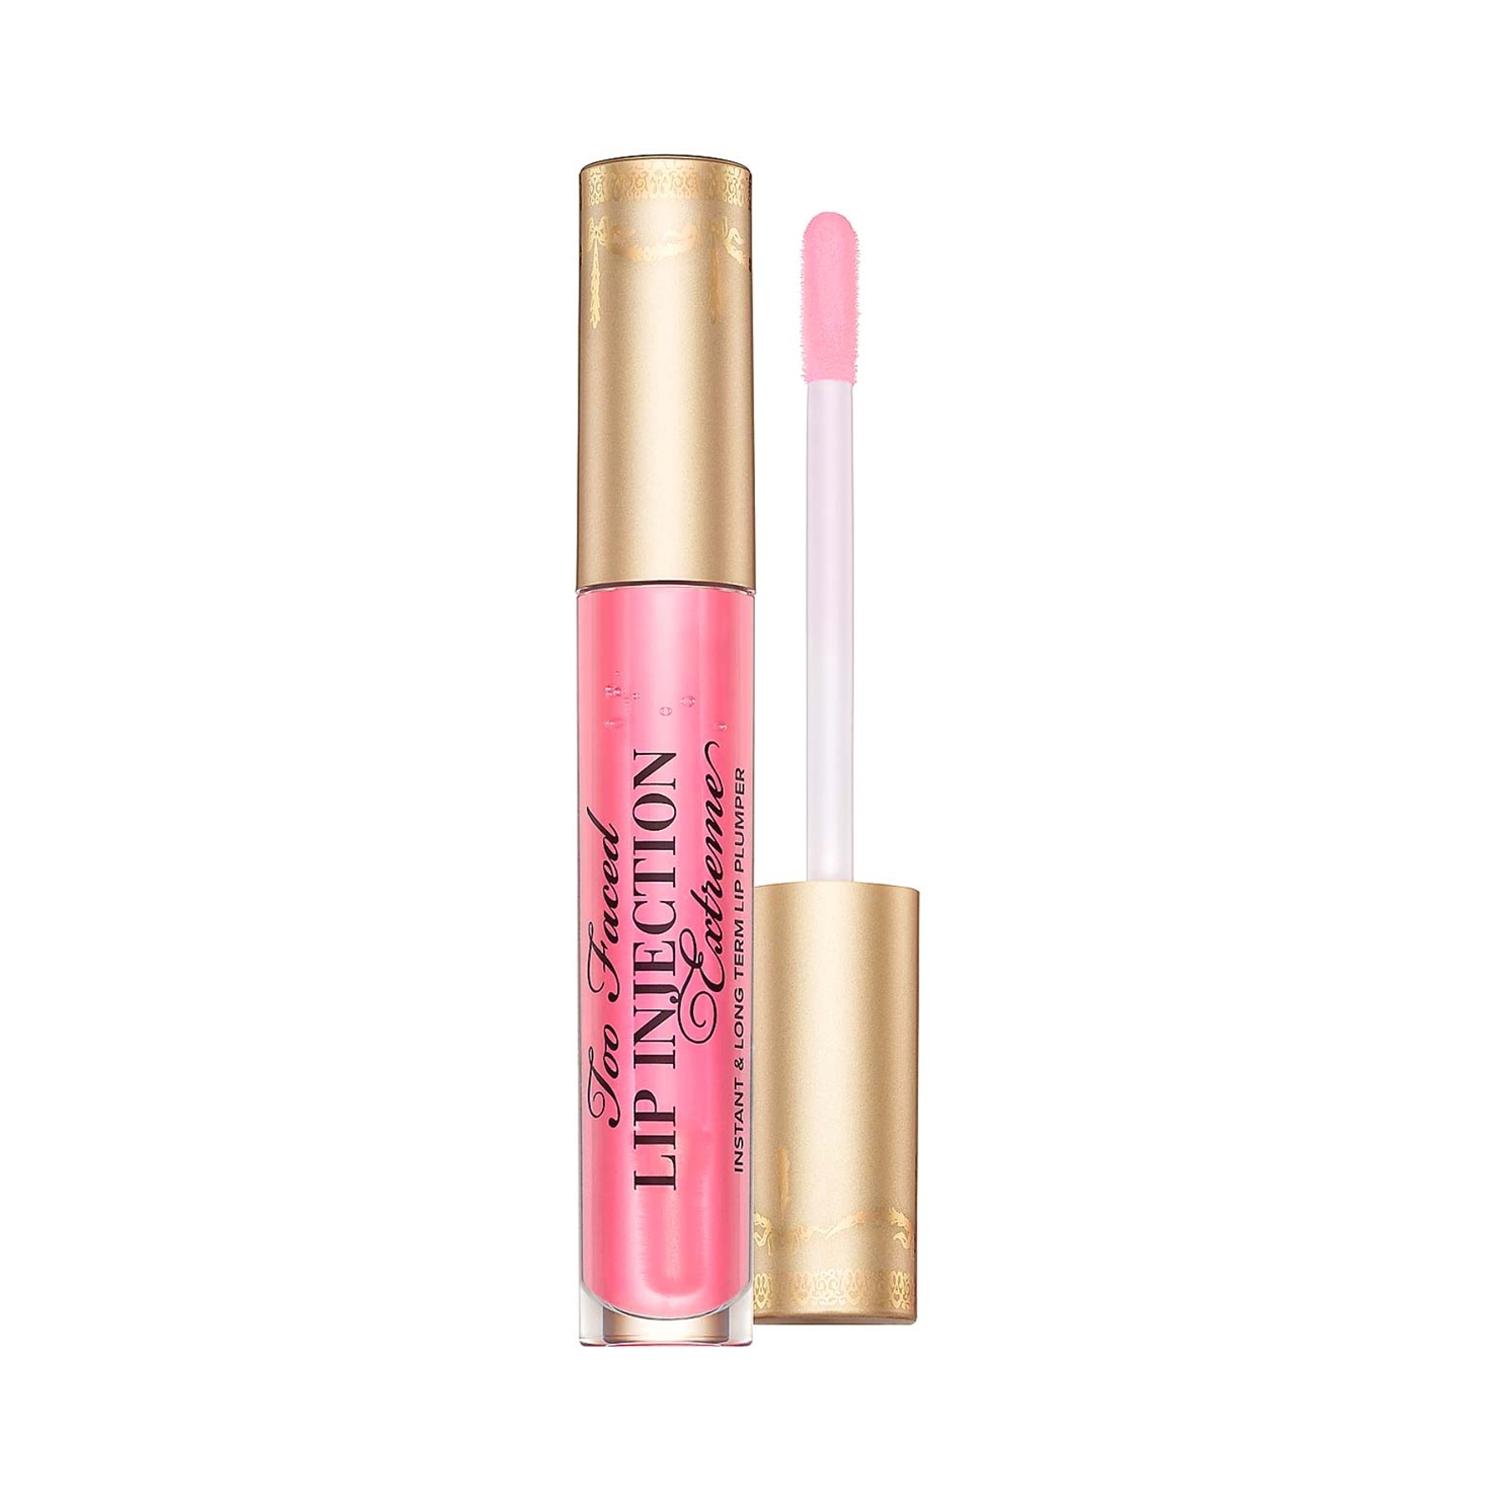 too faced lip injection extreme lip plumper - bubblegum yum (4g)